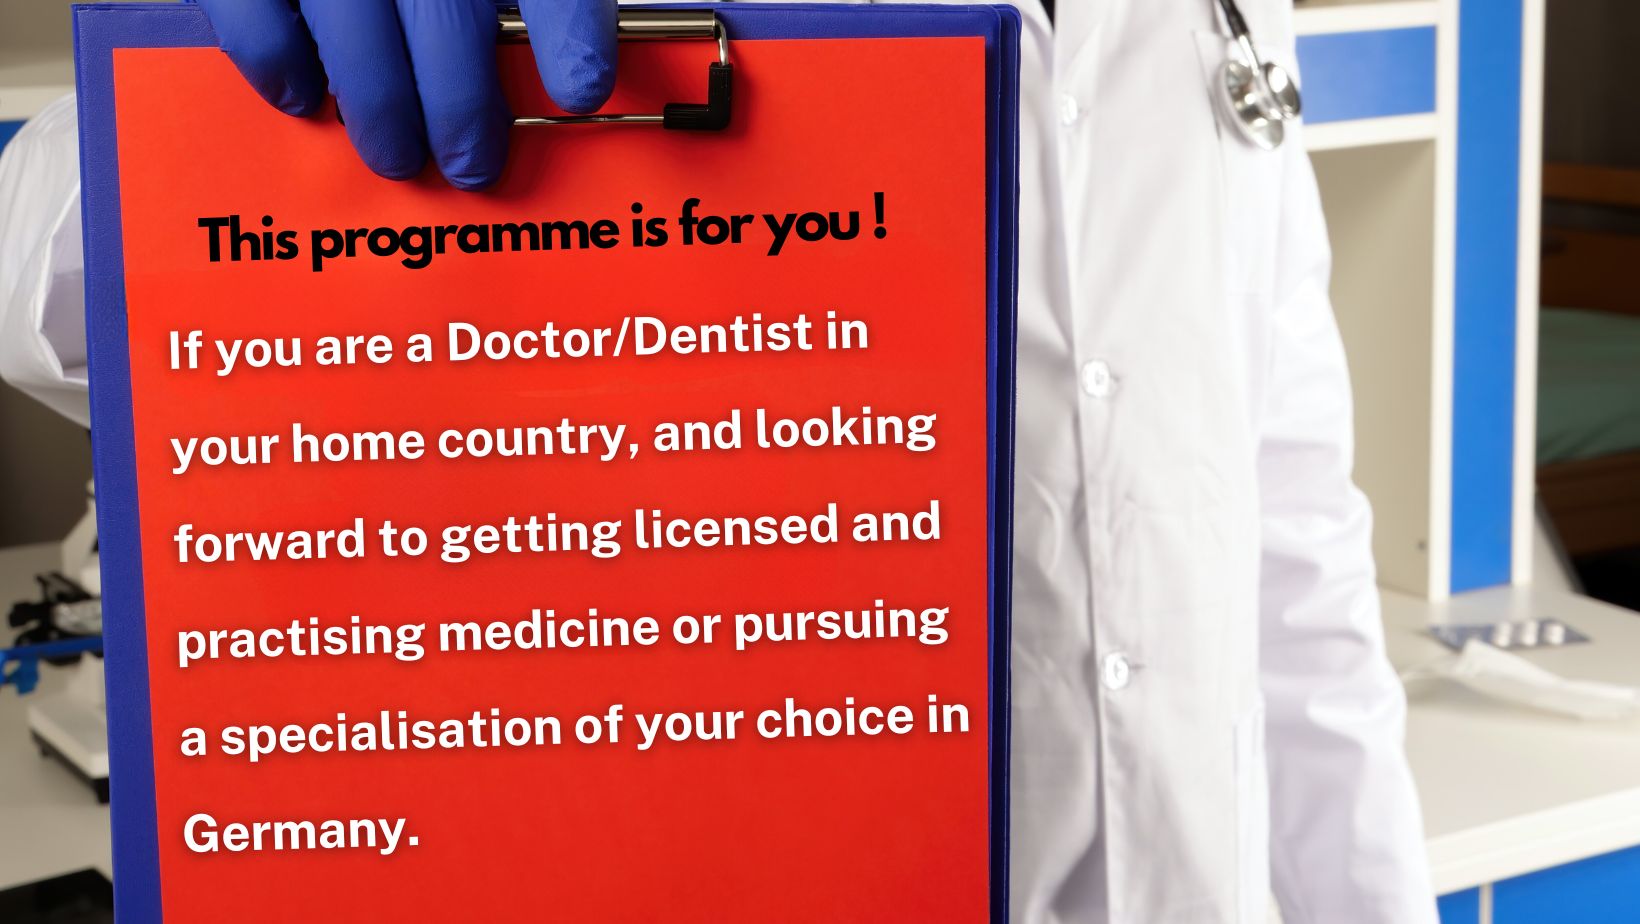 Doctor and Dentist program in Germany